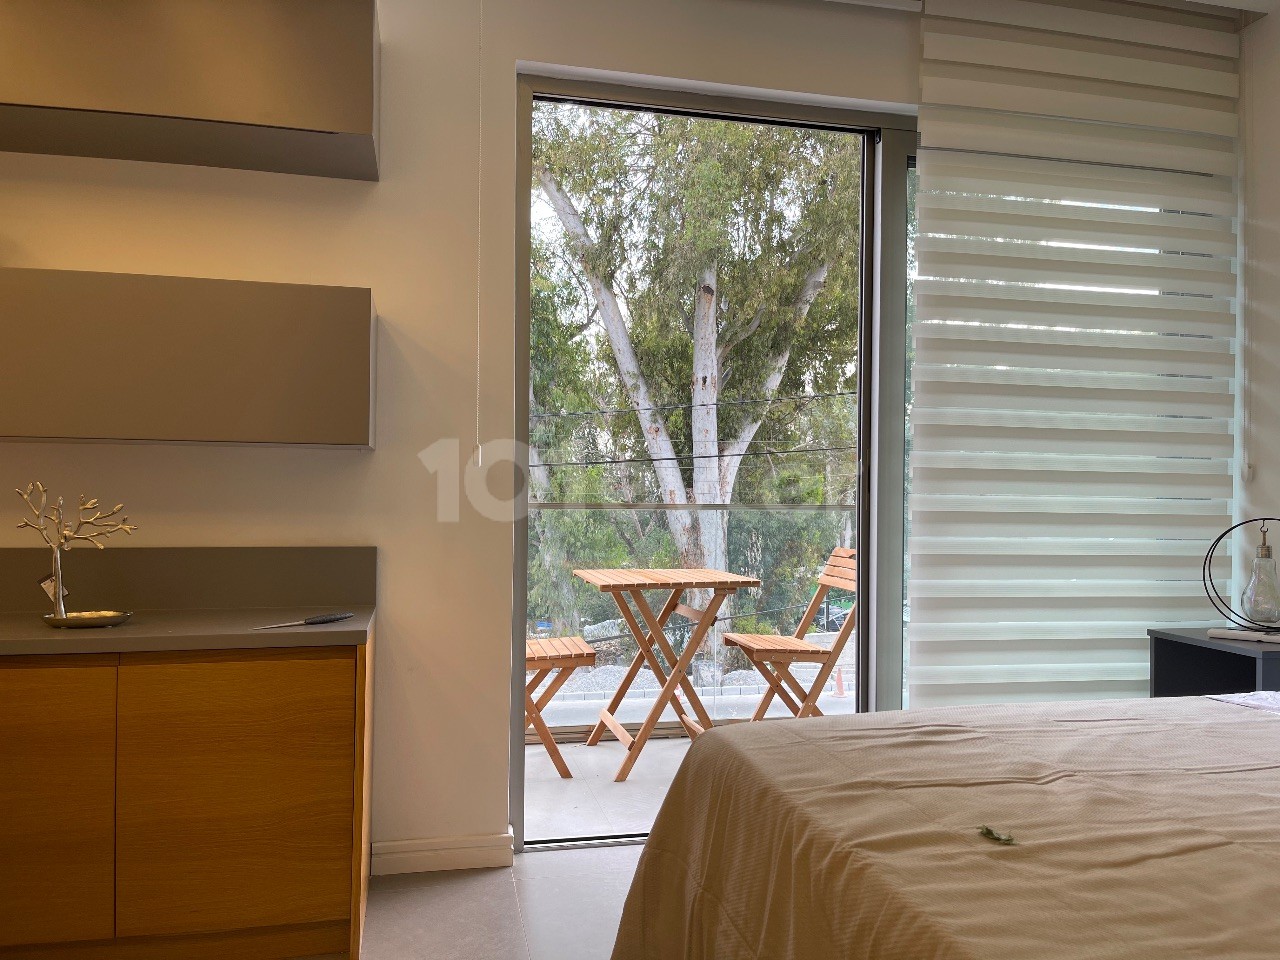 Dereboyunda, the center of Nicosia, is only 10 steps away from Grand Pasha Hotel & Casino. Enjoy a stylish experience in this centrally located ultra-lux apartment. Be privileged with free dry cleaning and laundry service.